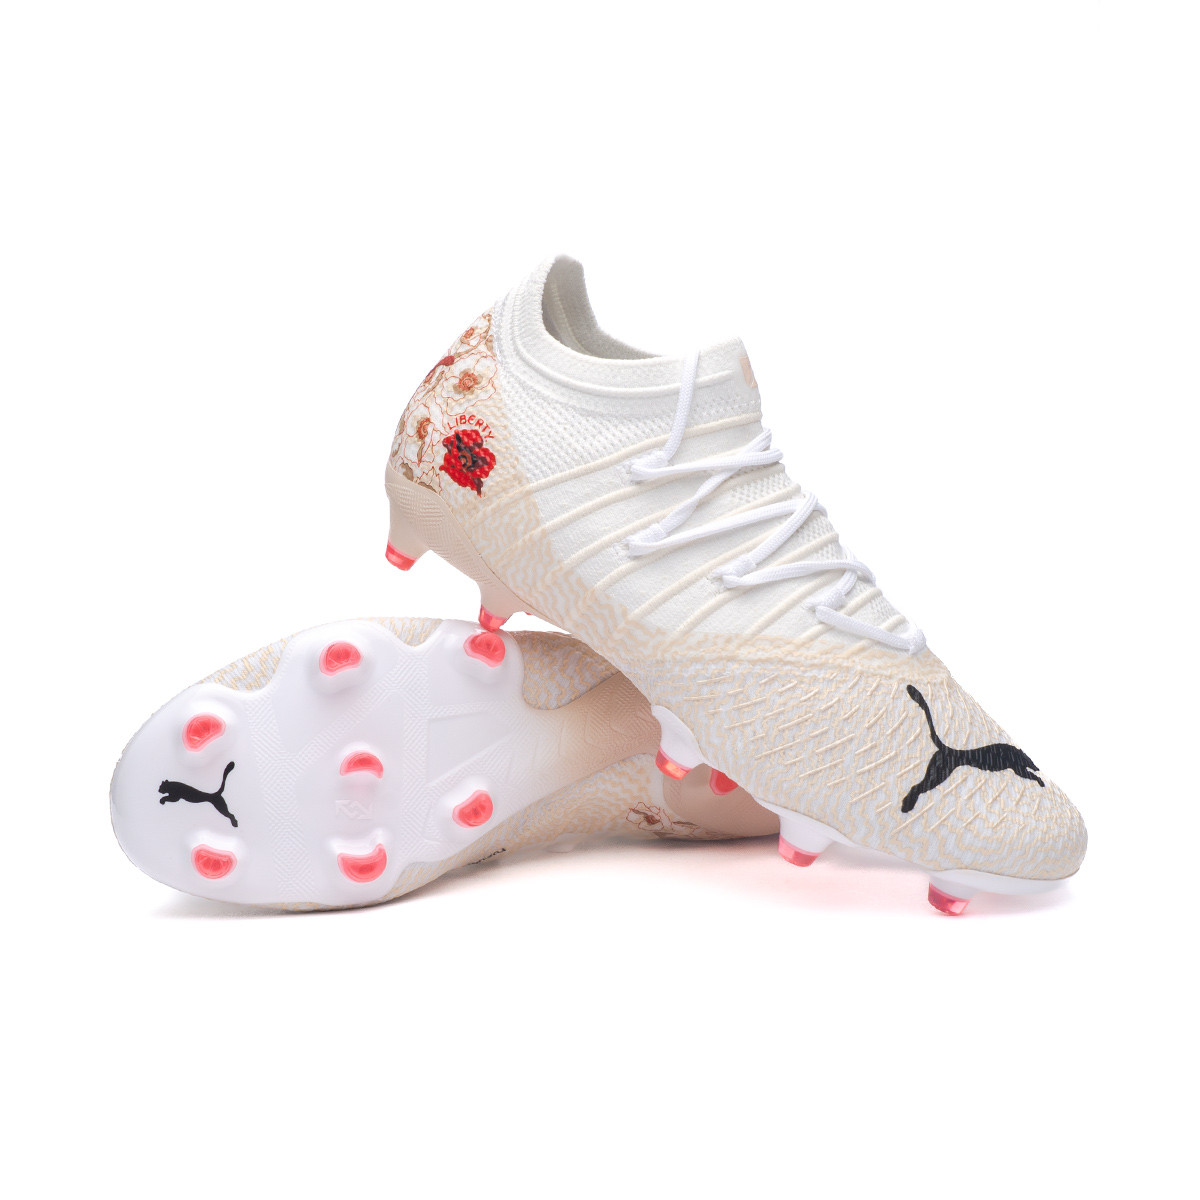 Crampon Puma Future Shop Discounted 68 Off Gioithieuxe Vn